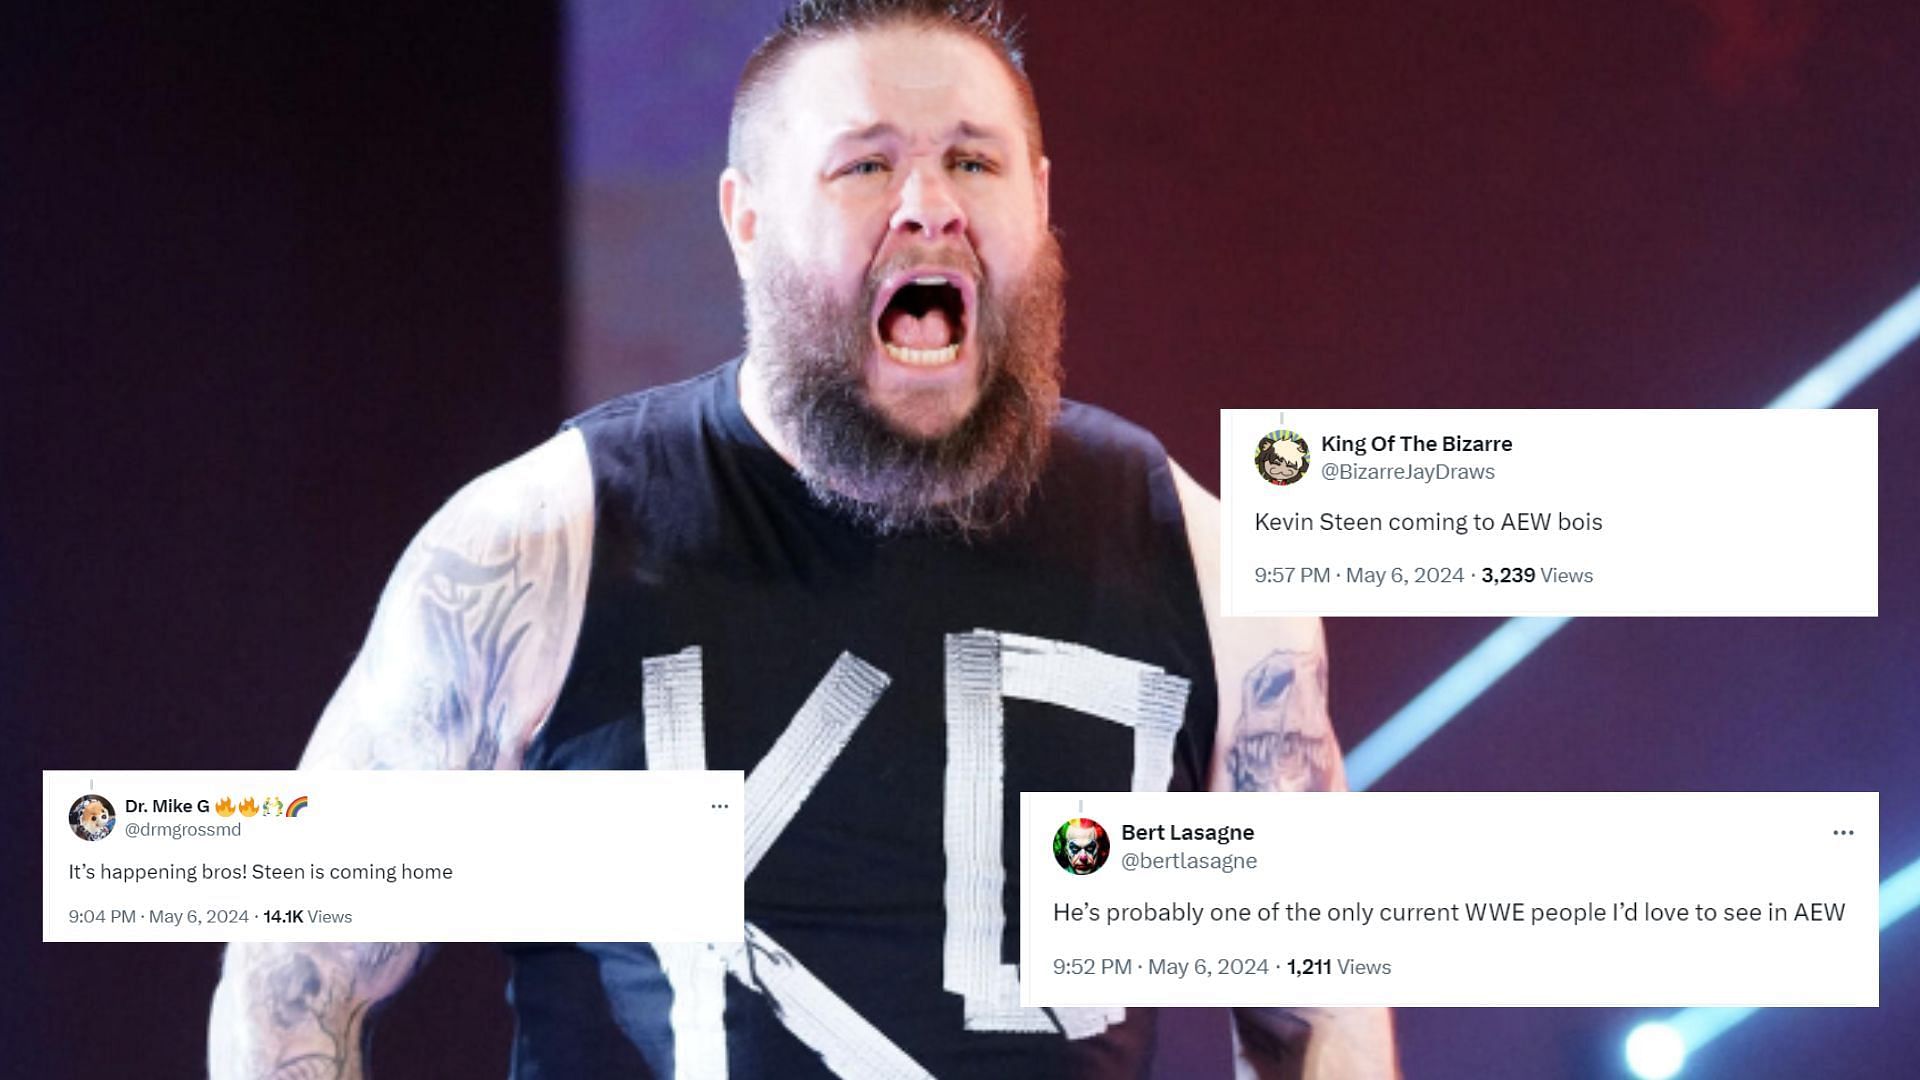 Kevin Owens is signed to WWE and performs on Smackdown [Image Credits: WWE